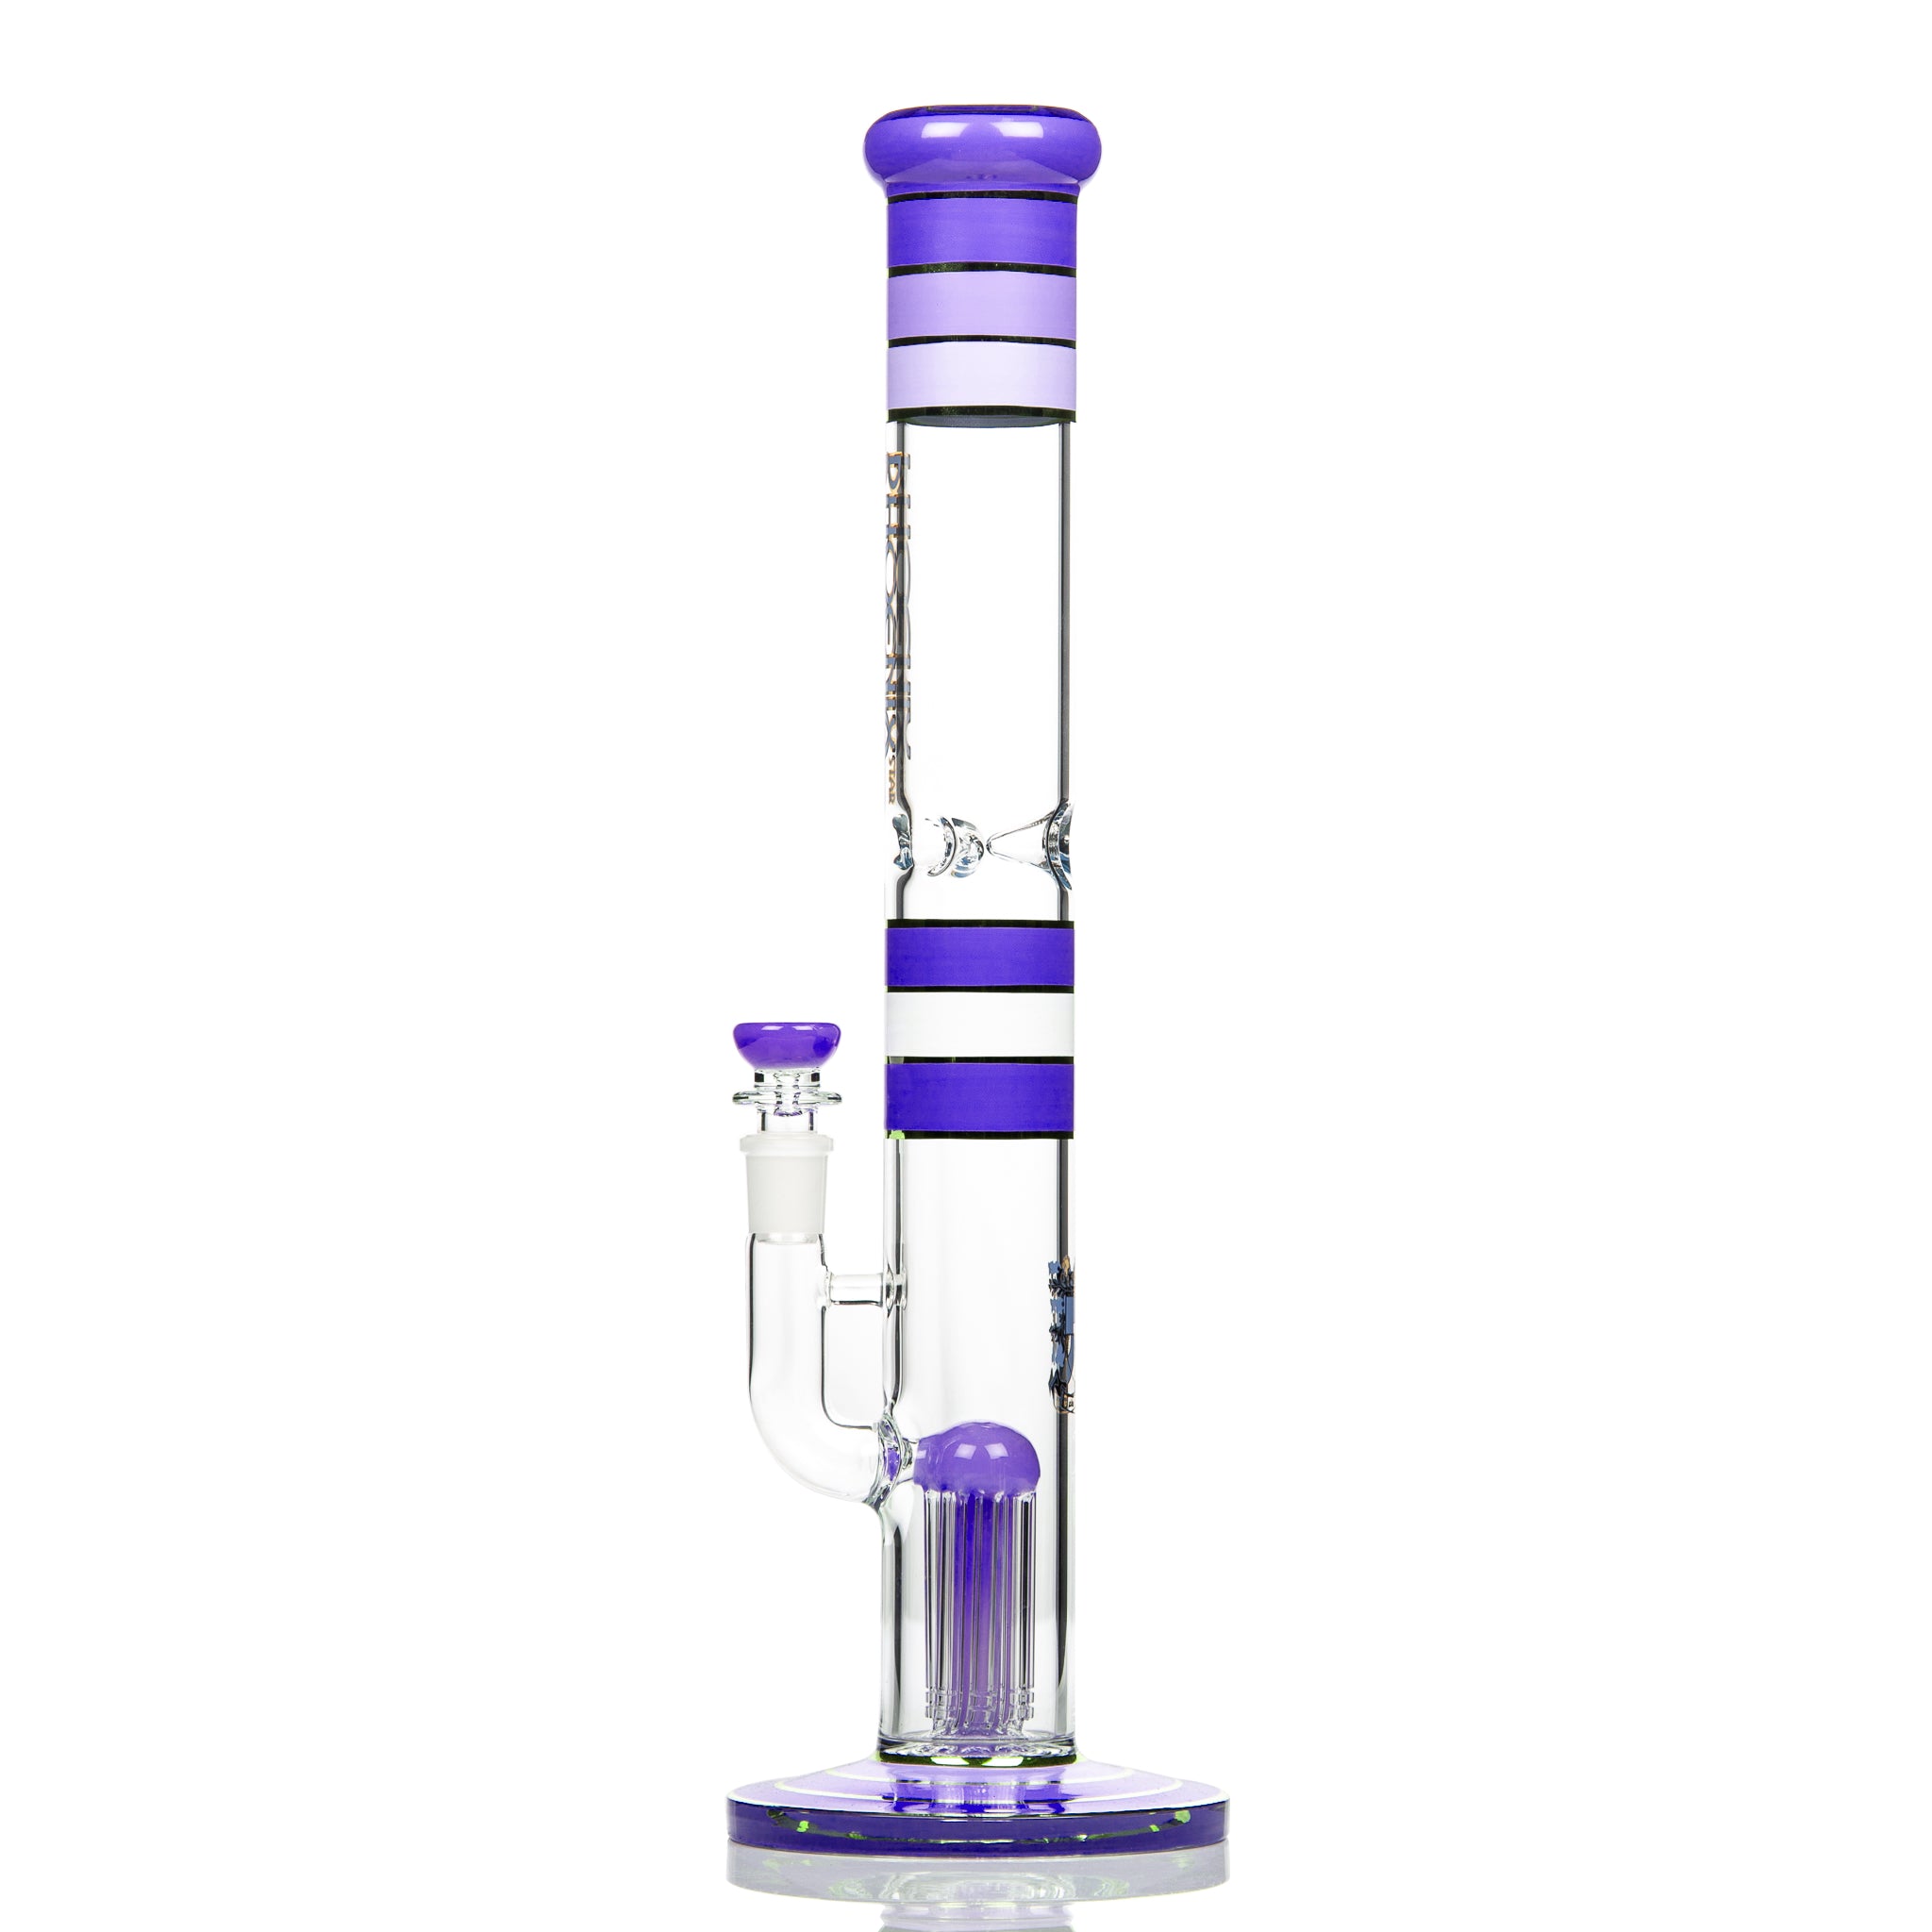 Phoenix 8 arm tree tube straight bong with decorative coloured sections.